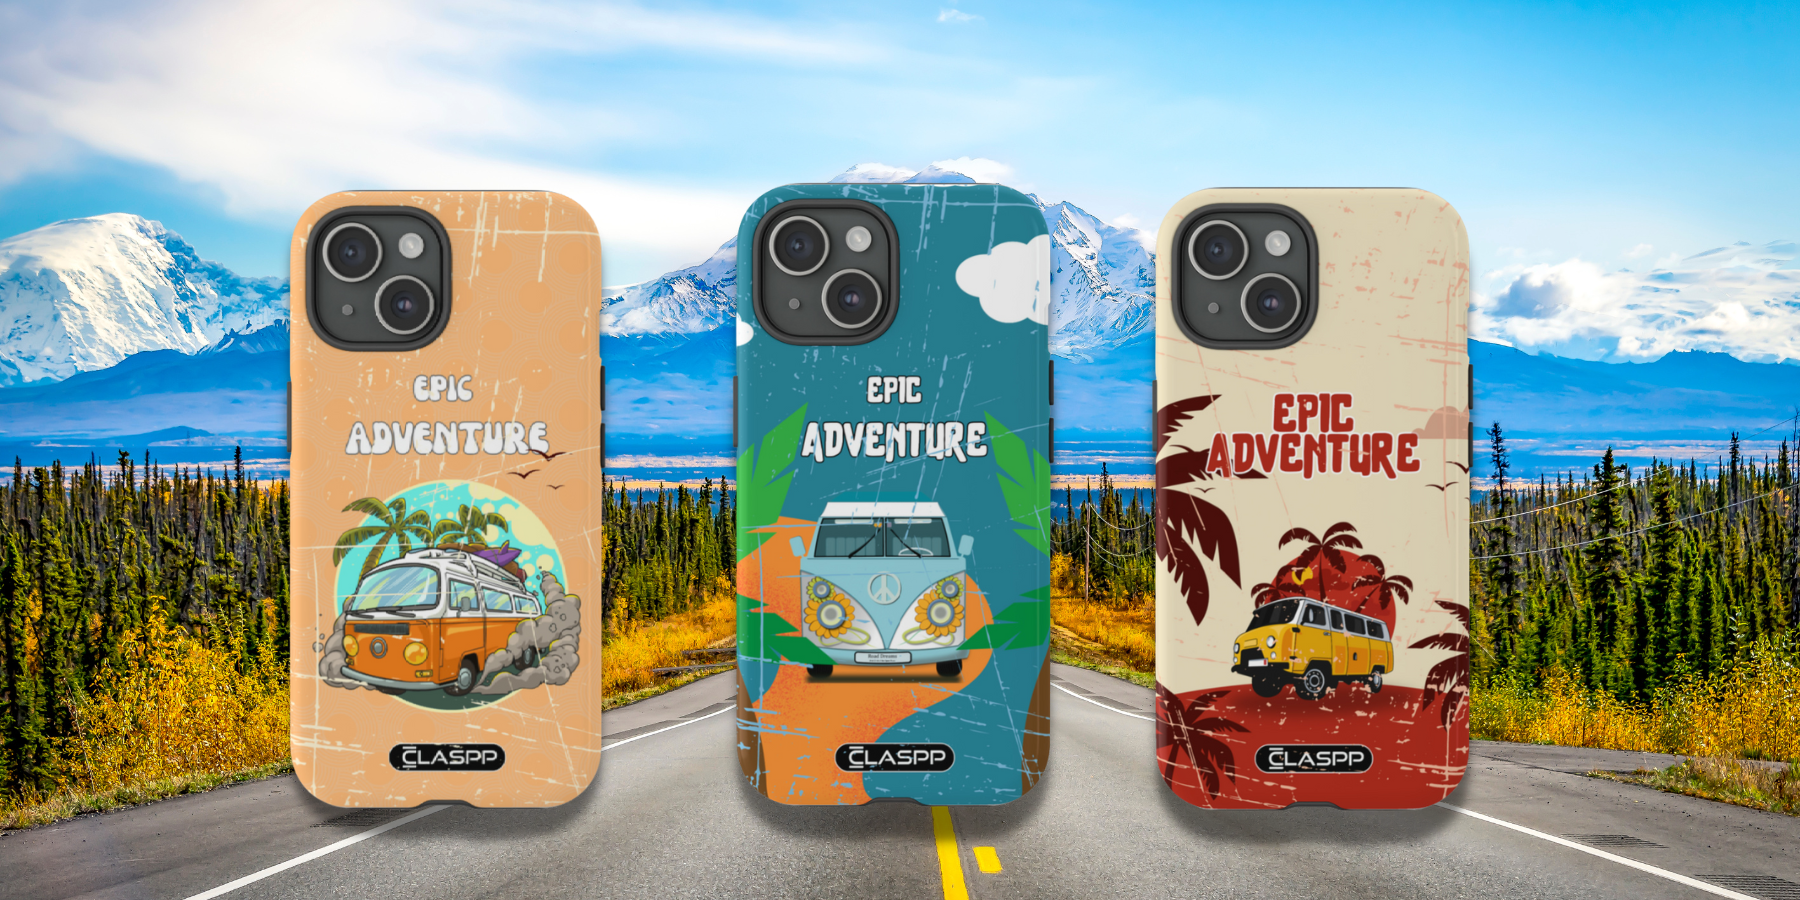 The Epic Adventure Collection